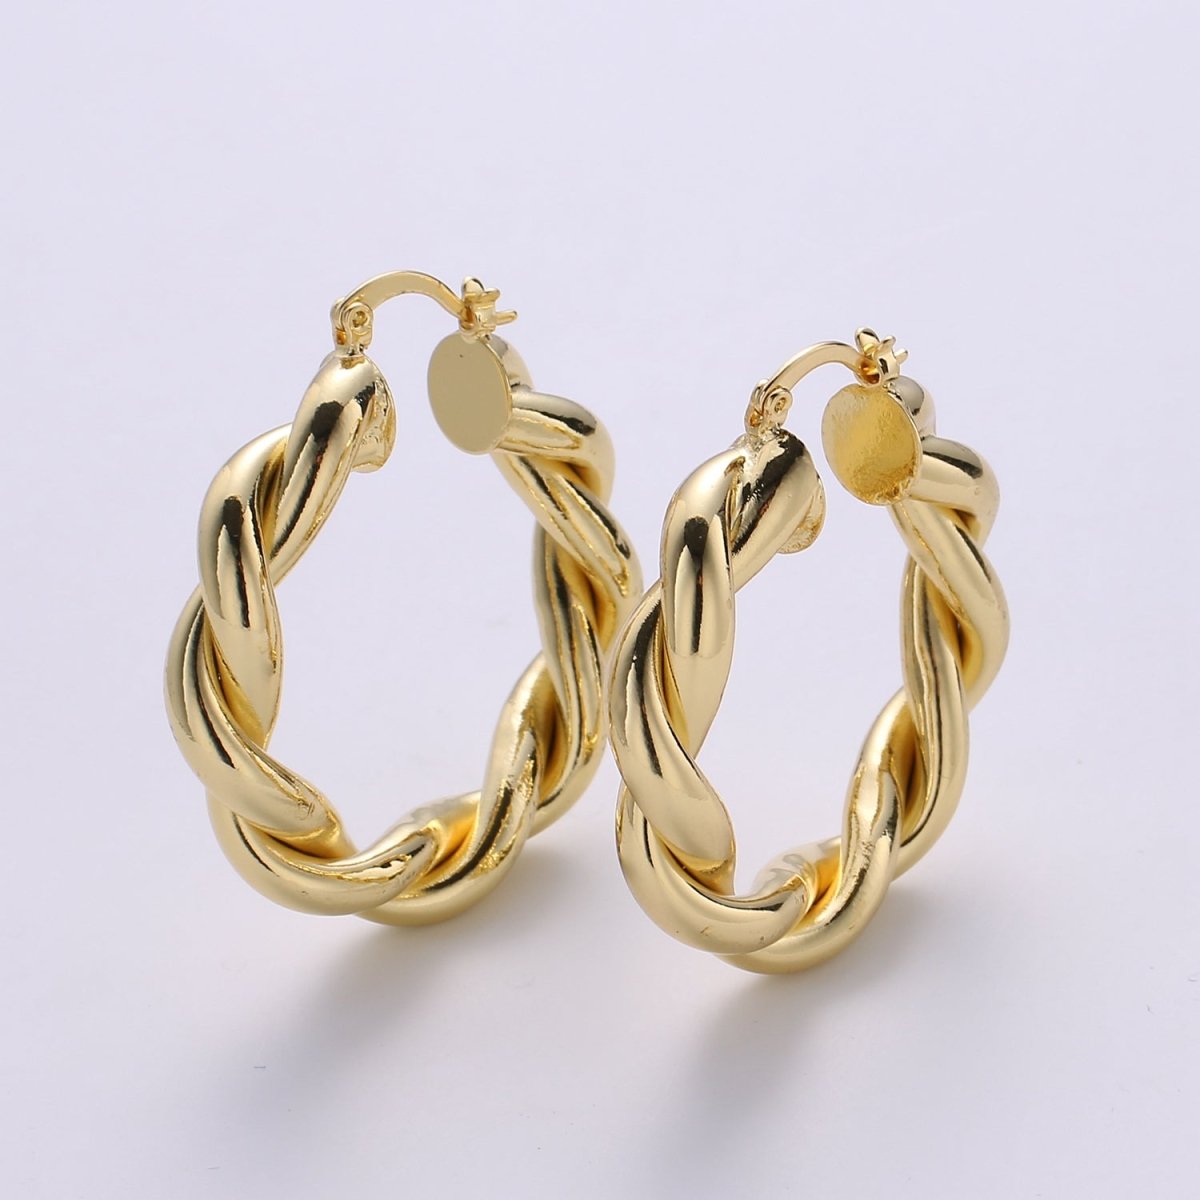 Gold Twisted Hoop Earrings, Bold Gold Hoop Earrings, Chunky Earrings, Statement Hoops, 14k Gold Filled Hoops Earring gift for her Q-518 to Q-520 - DLUXCA